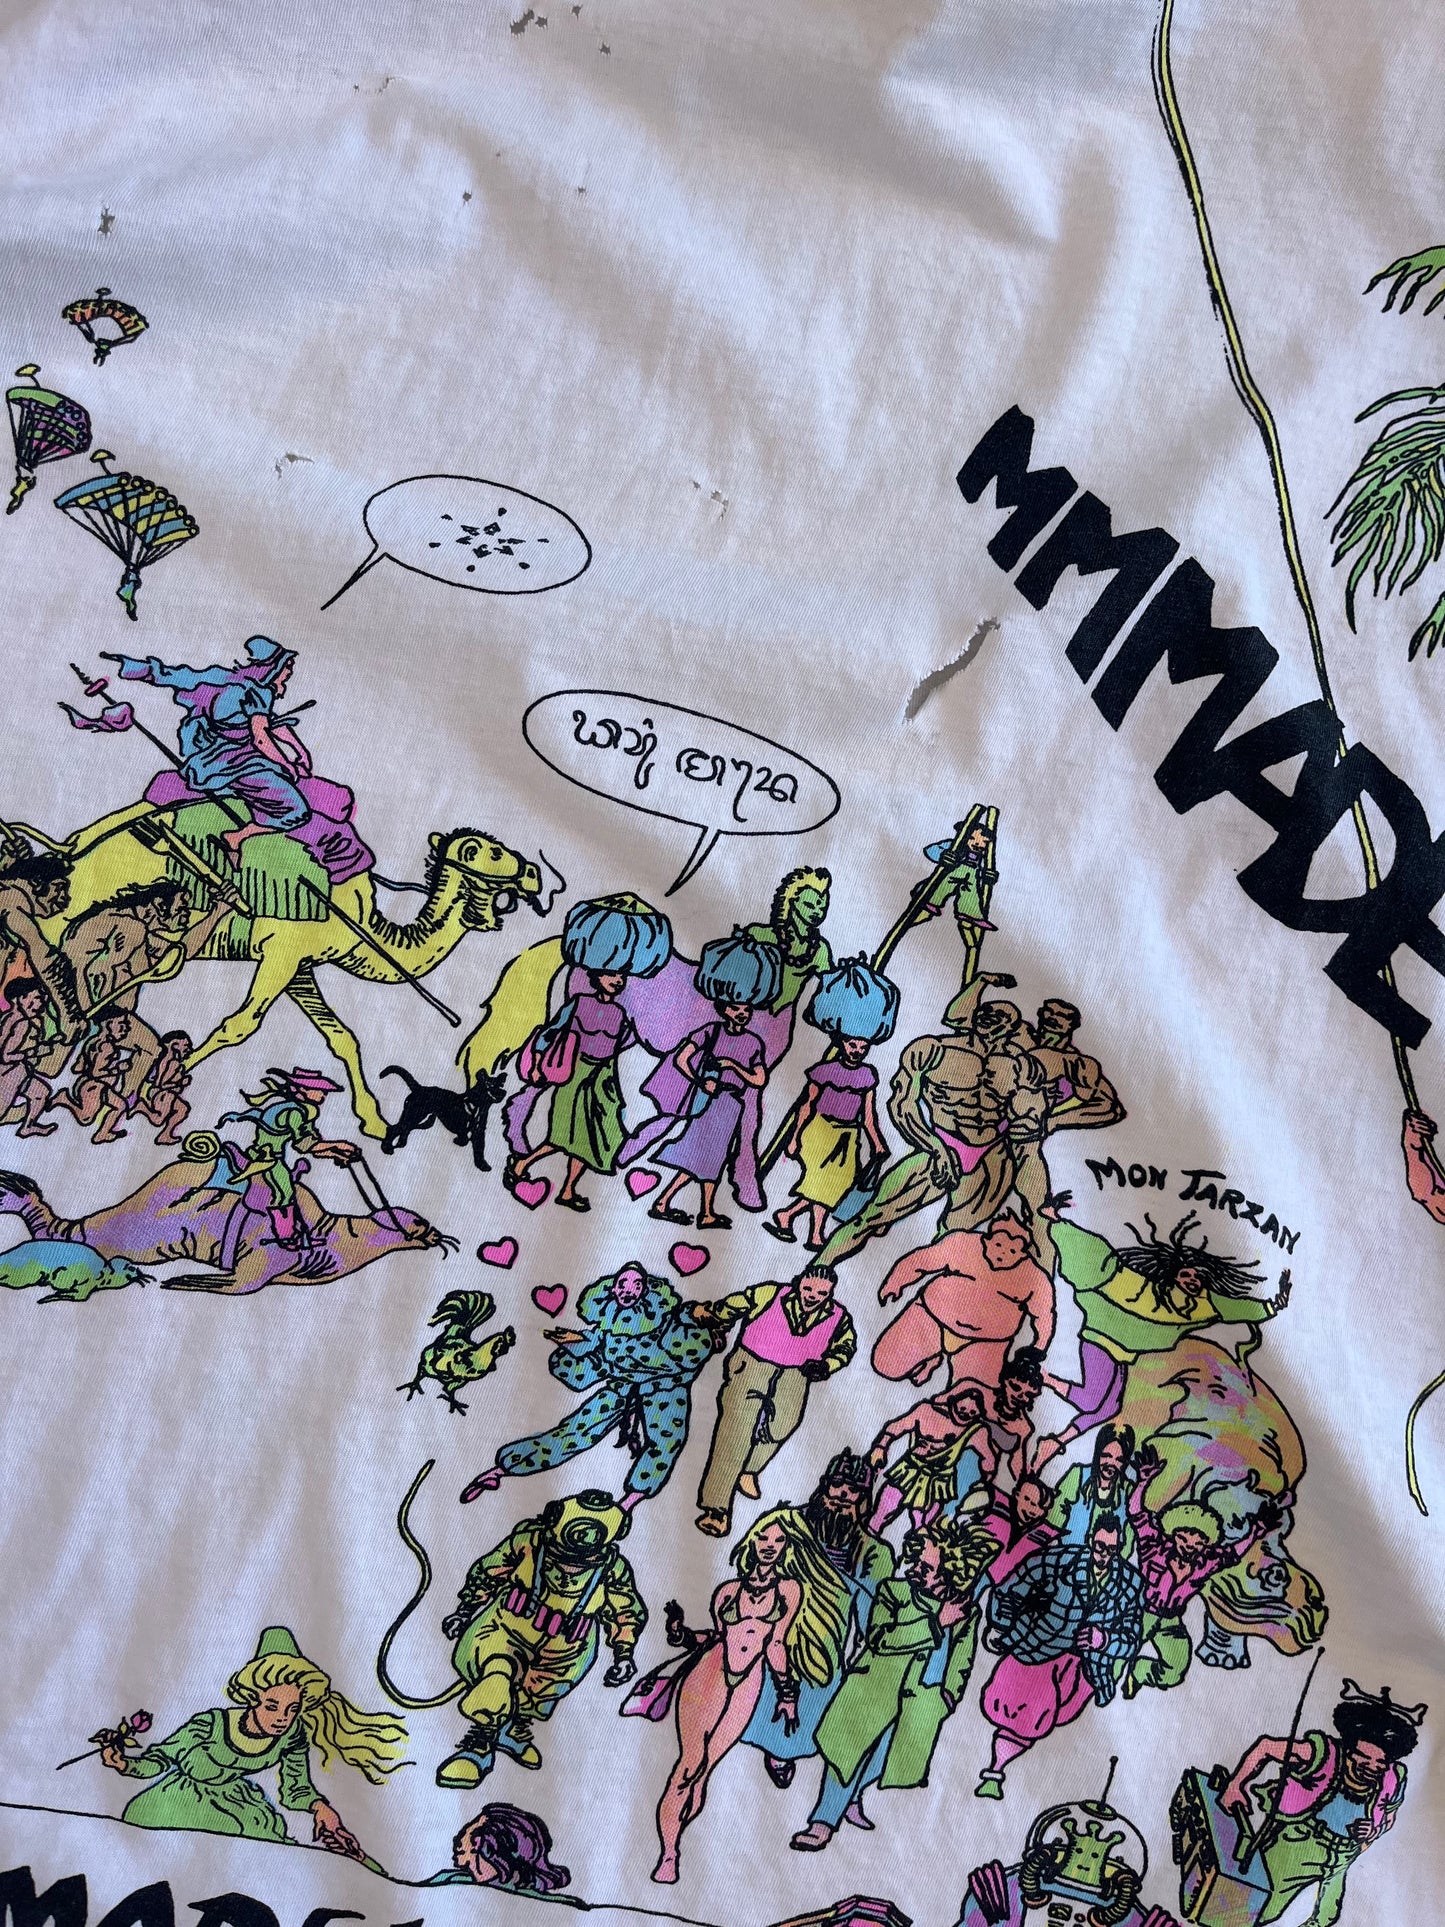 (XL) 1989 Graphic Tee